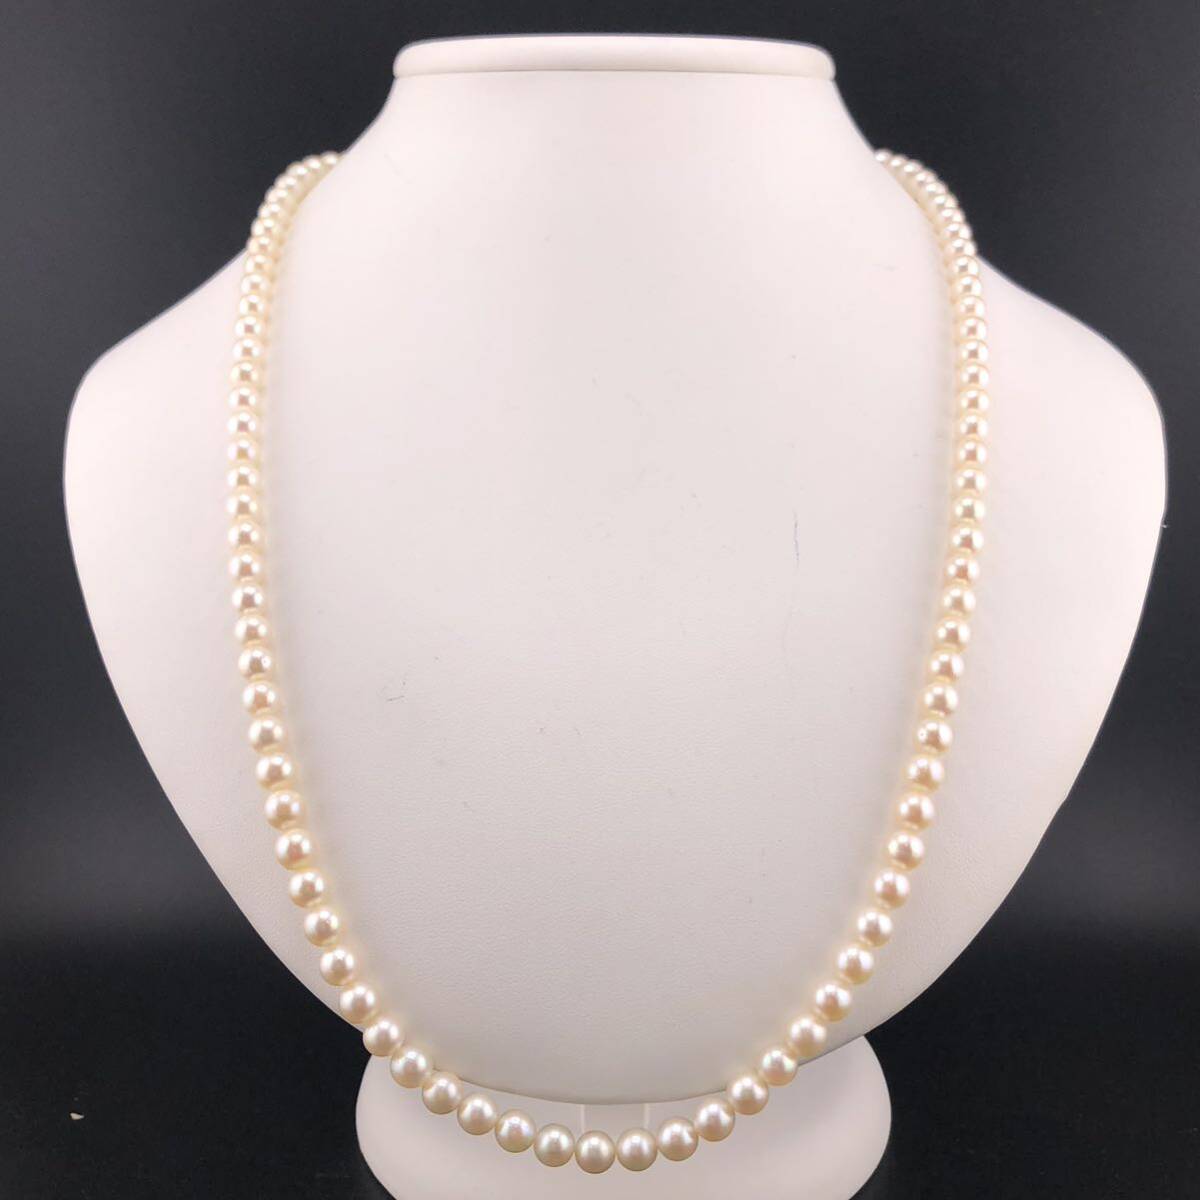 E04-1939☆☆ アコヤパールネックレス 6.0mm 61cm 35.4g ( アコヤ真珠 Pearl necklace SILVER )の画像1